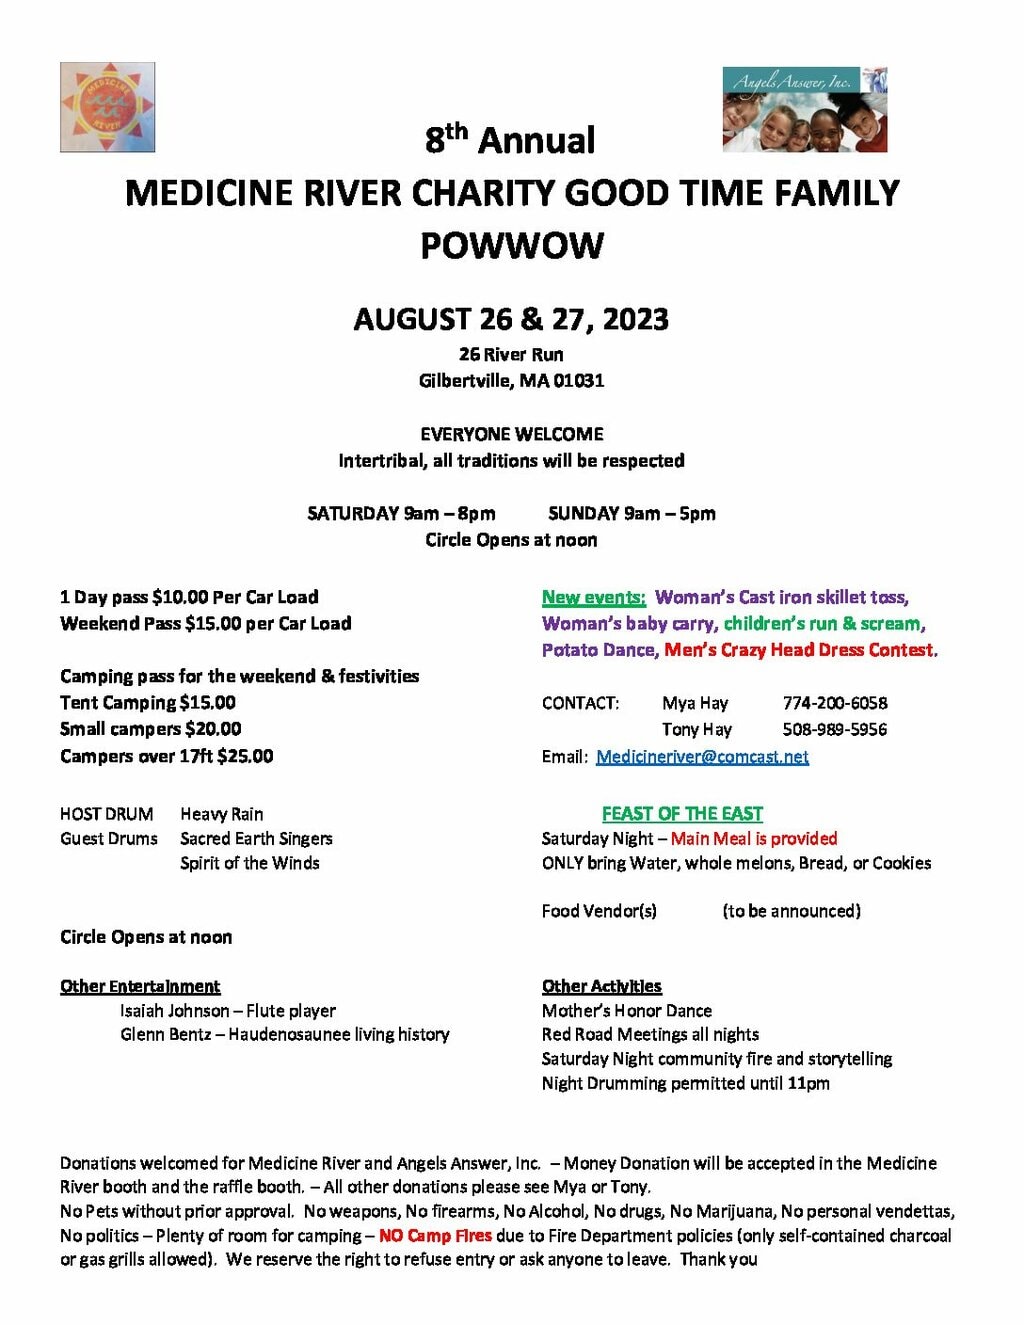 8th Annual Medicine River Charity Good Time Family Pow Wow 2023